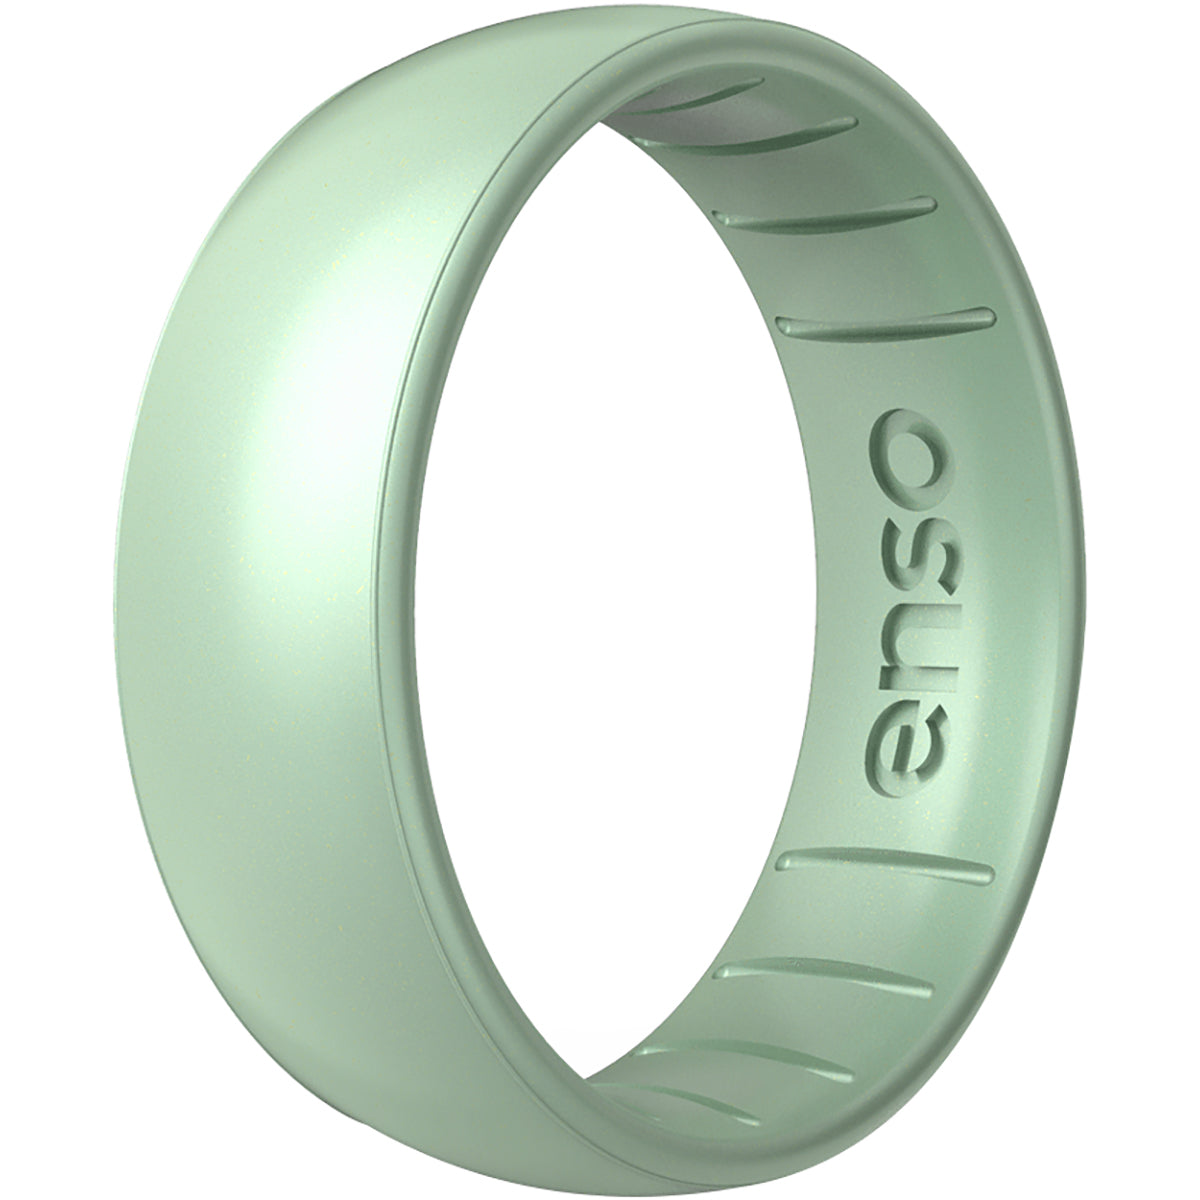 Enso Rings Classic Legends Series Silicone Ring - Medusa Enso Rings